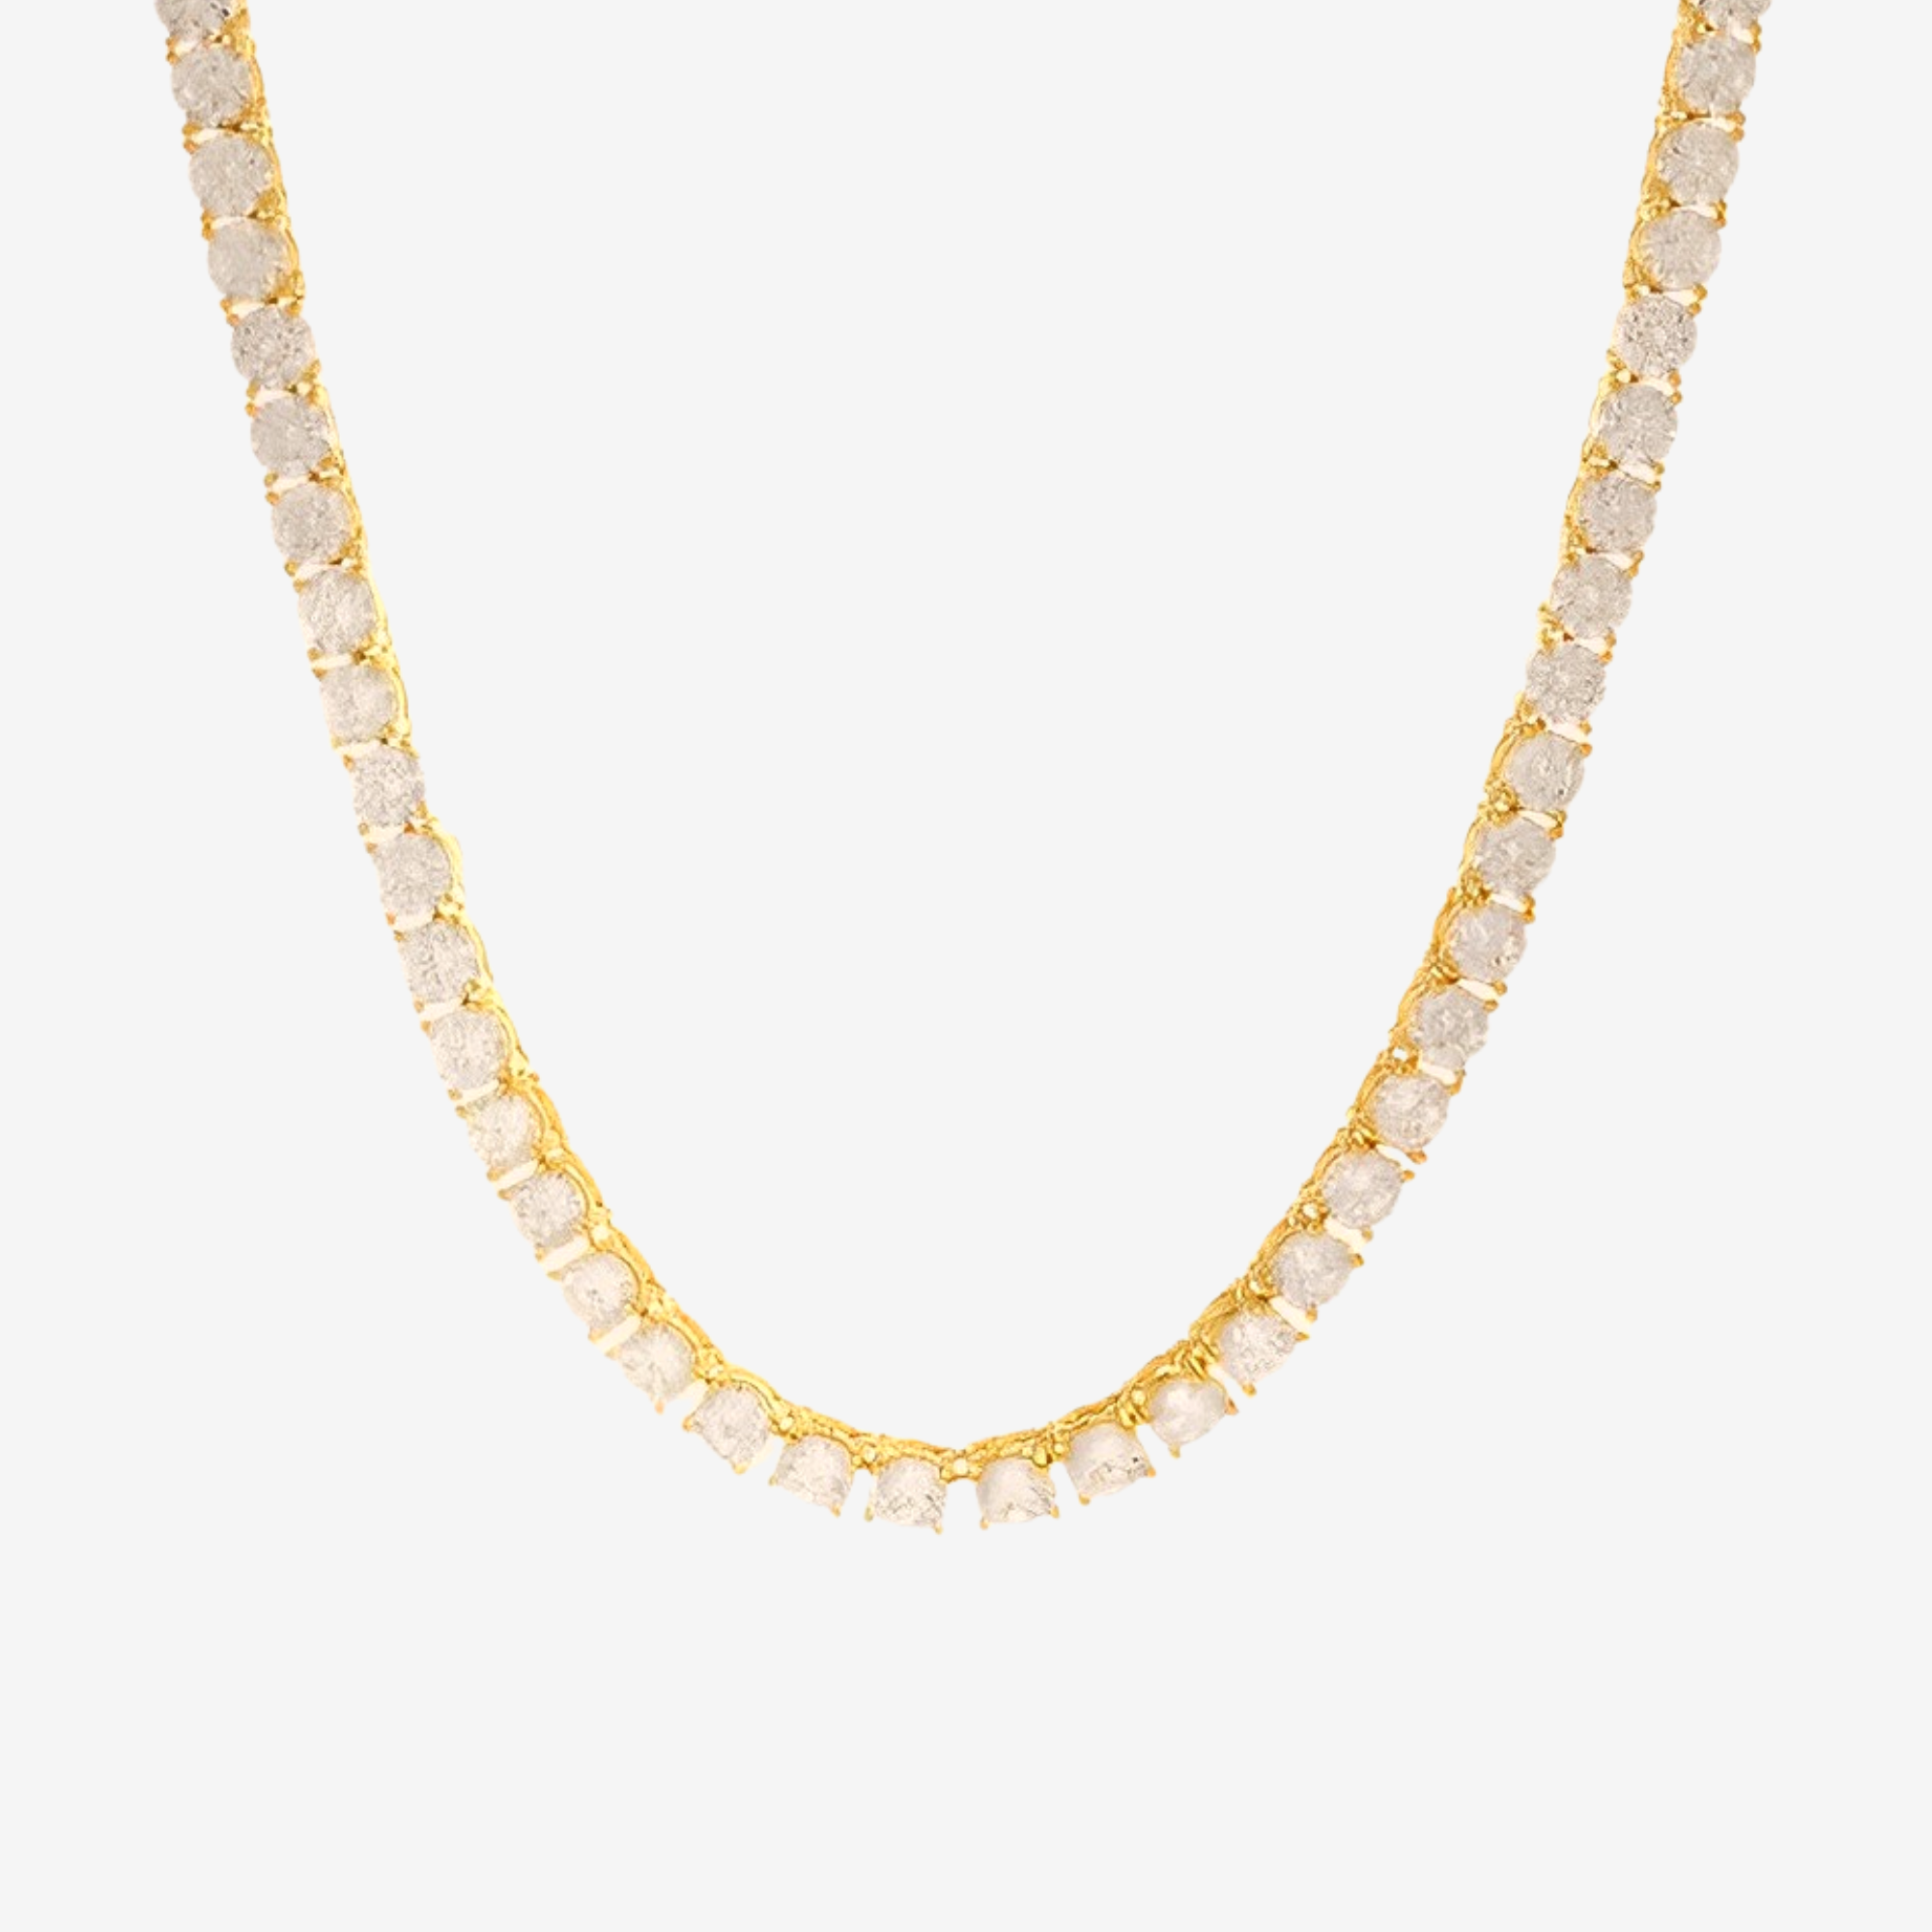 Hillenic GOLD Classic Tennis Chain hanging on the grey background